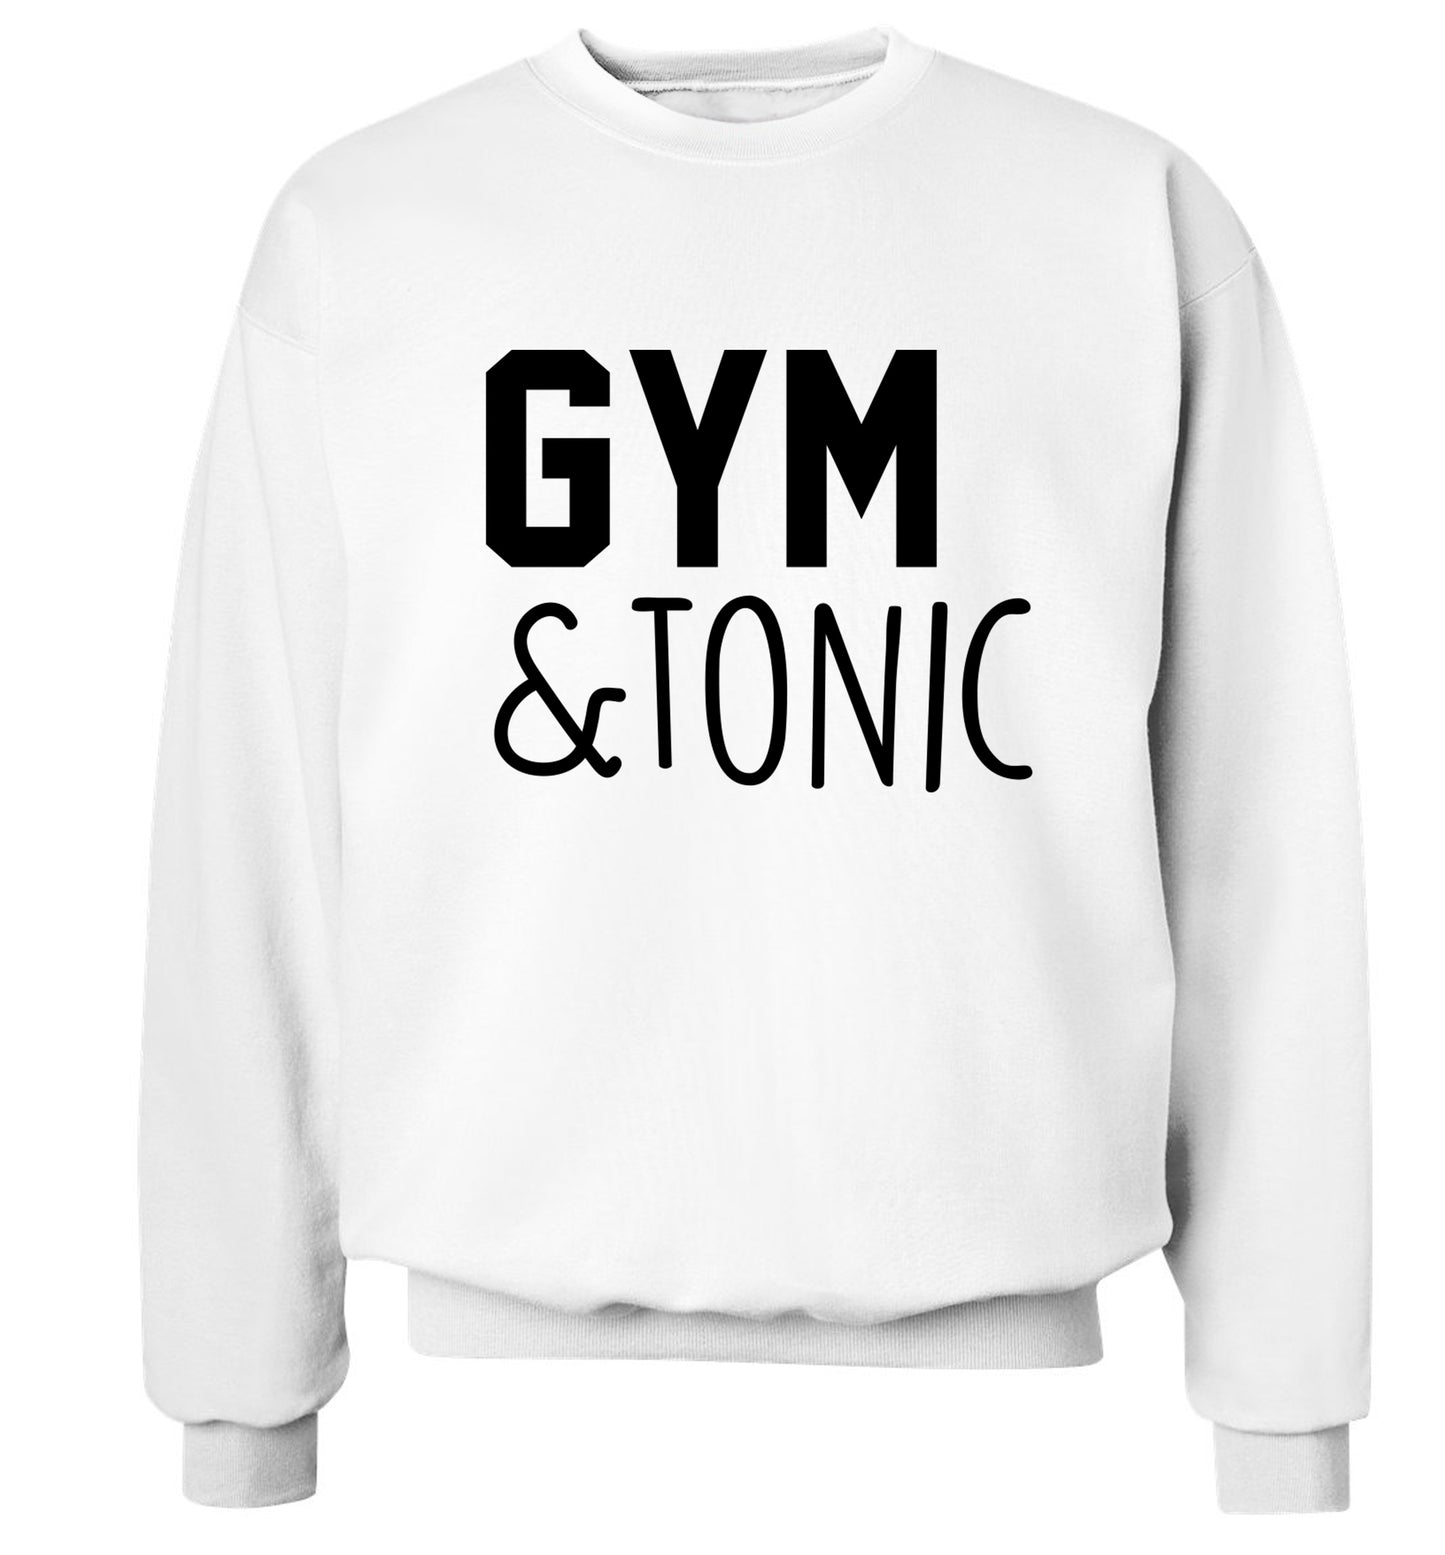 Gym and tonic Adult's unisex white Sweater 2XL